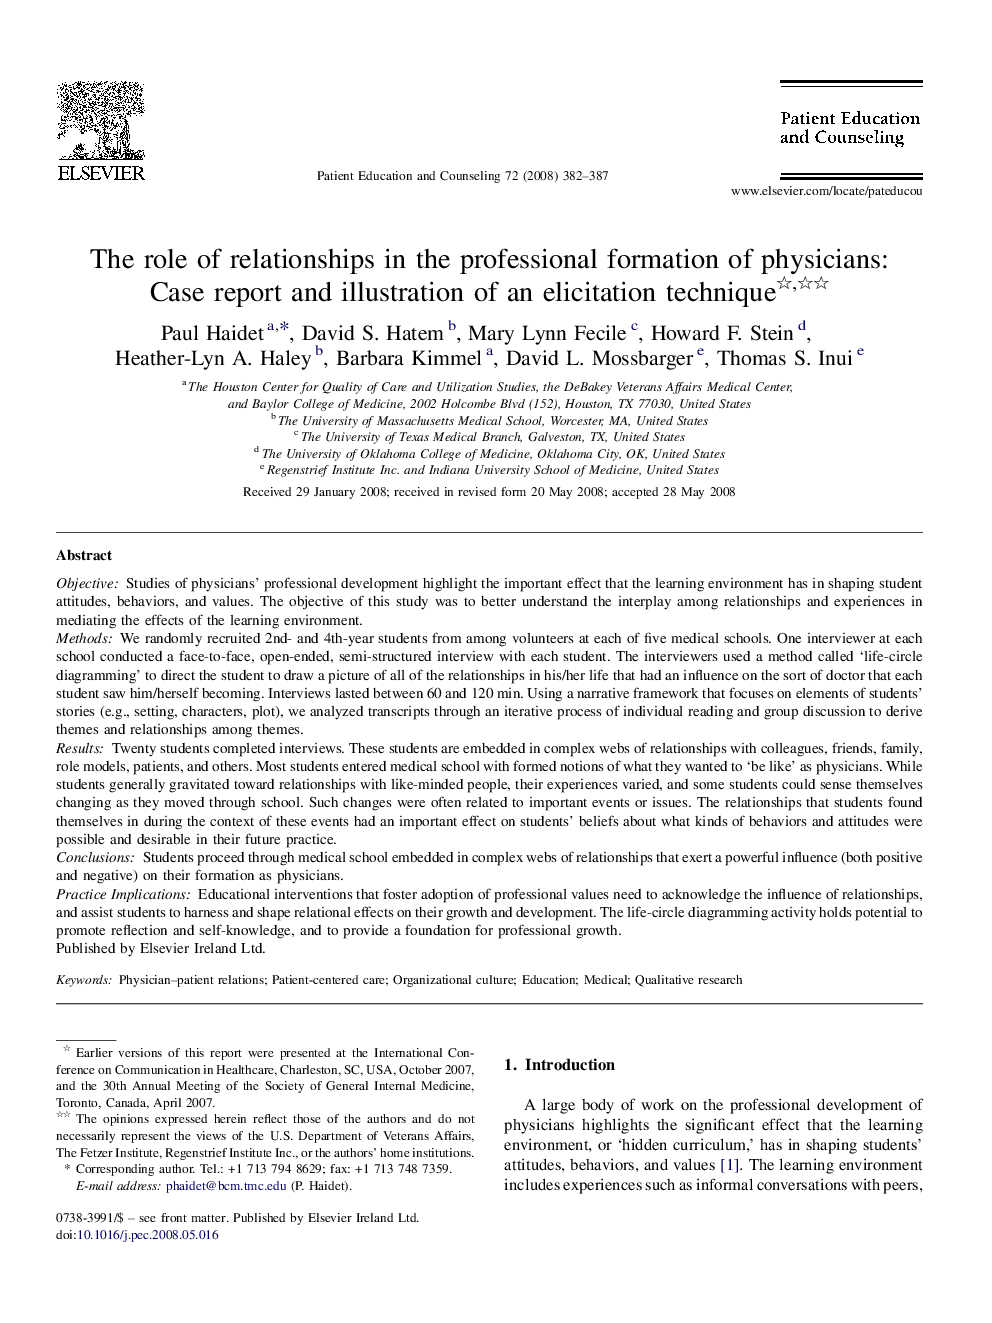 The role of relationships in the professional formation of physicians: Case report and illustration of an elicitation technique 